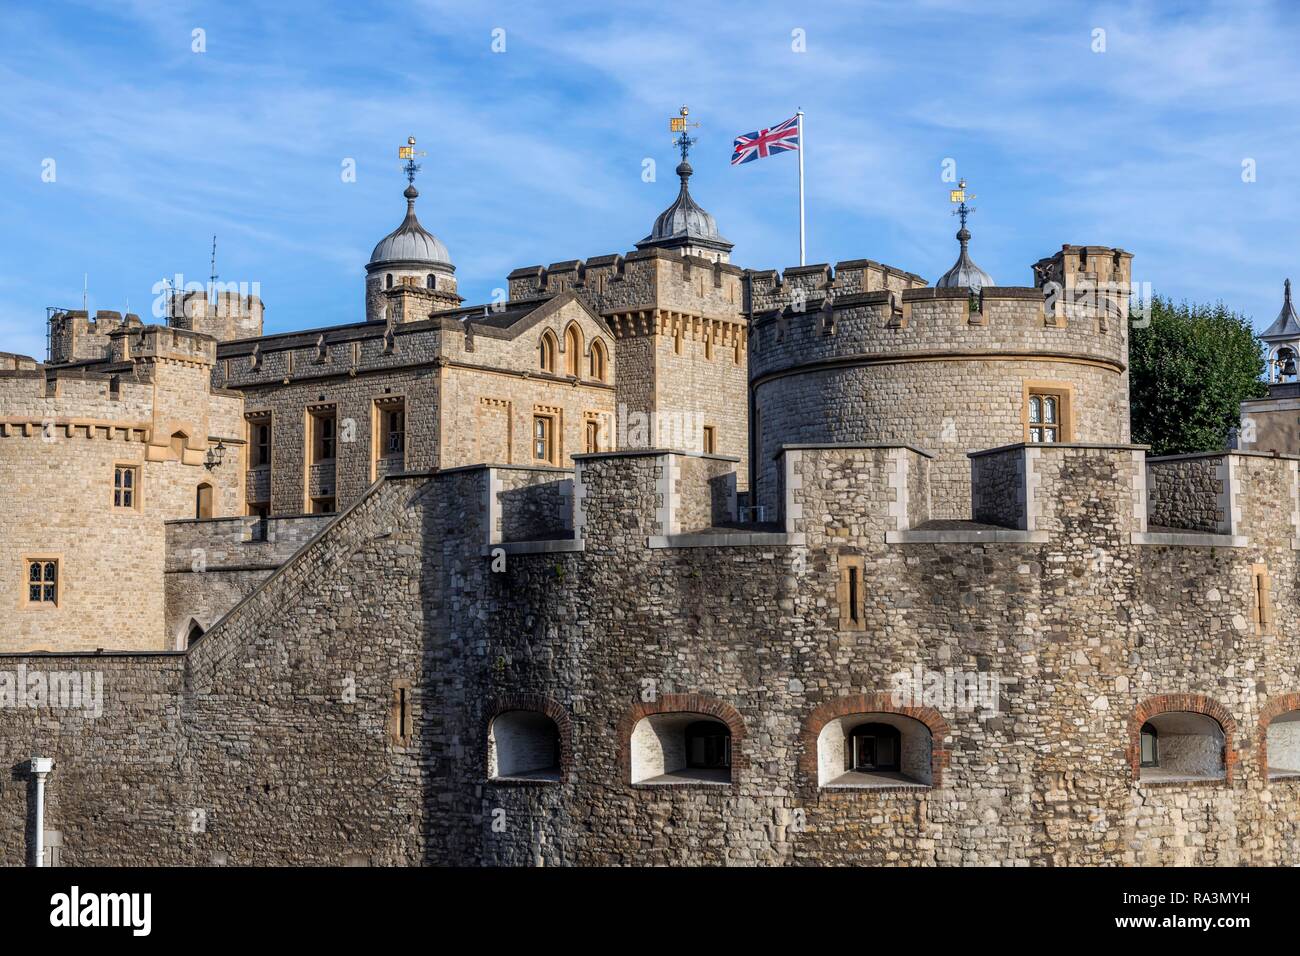 Tower of London, London, Great Britain Stock Photo